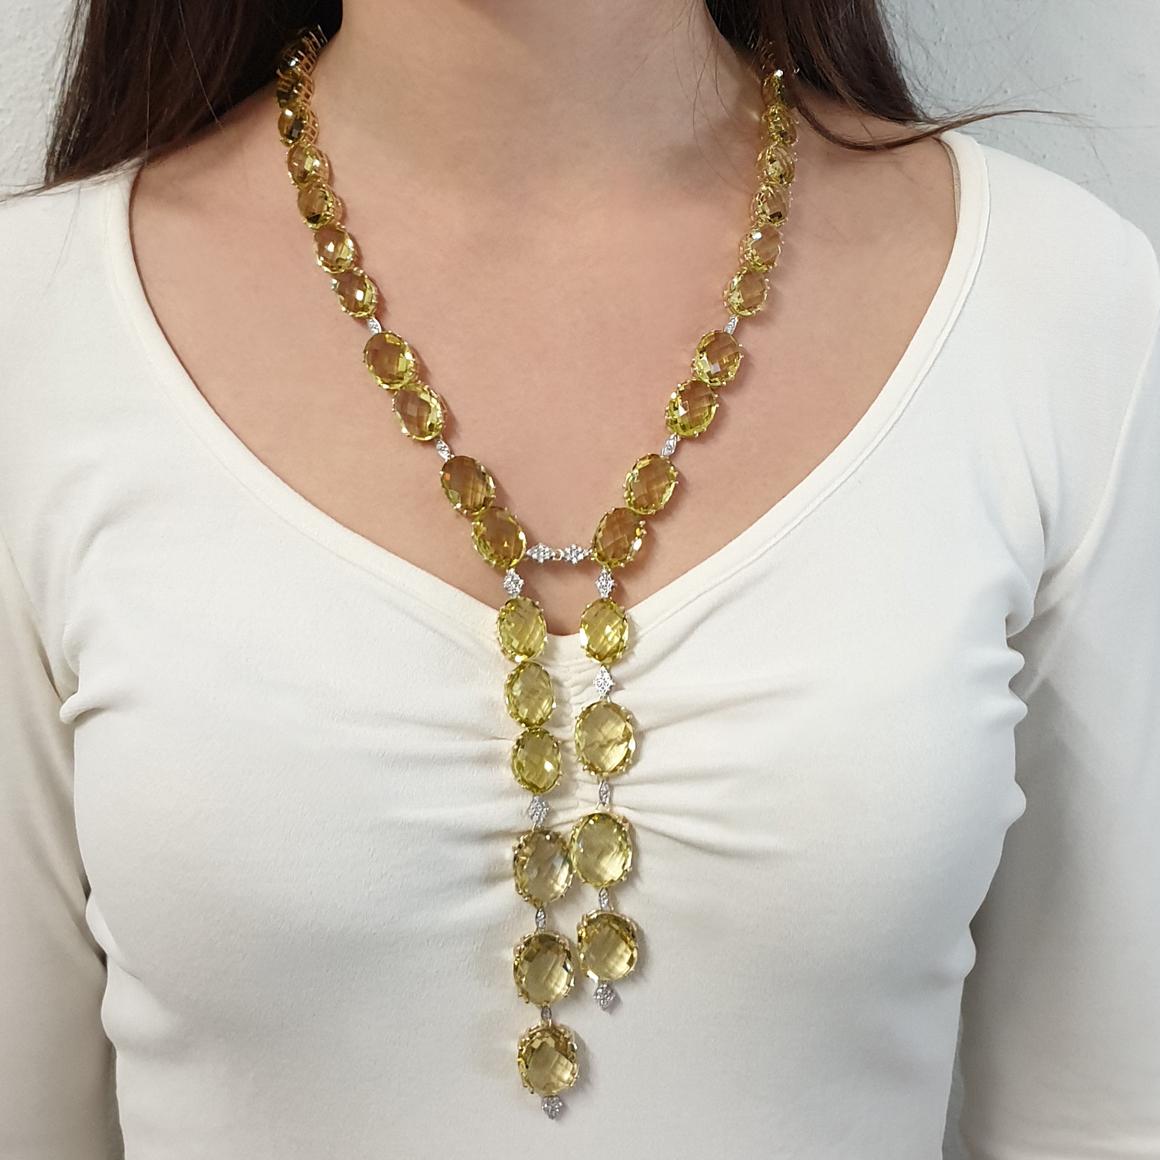 Modern Necklace in 14 karat yellow gold with Lemon Quartz (Oval Briolè cut in 3 differents size: 10x14, 12x16, 15x18 mm) and 18 karat white gold with white diamonds karats 0,92. 
Amazing  Long Necklace inspired by the color of the sun and gives a